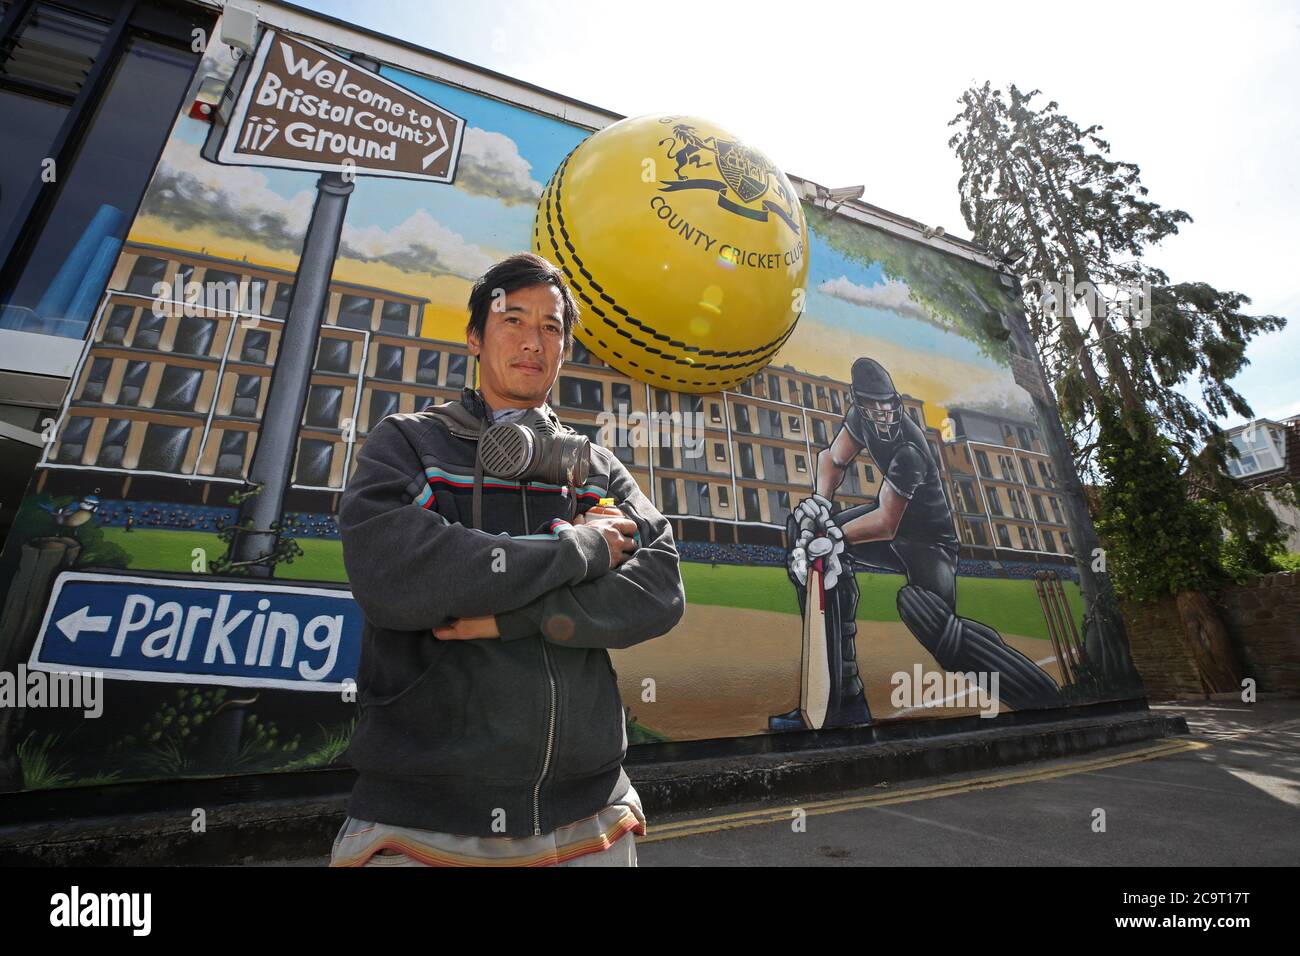 Graffiti artist Silent Hobo poses for a photo in front of his painted mural at Bristol County Ground. Stock Photo